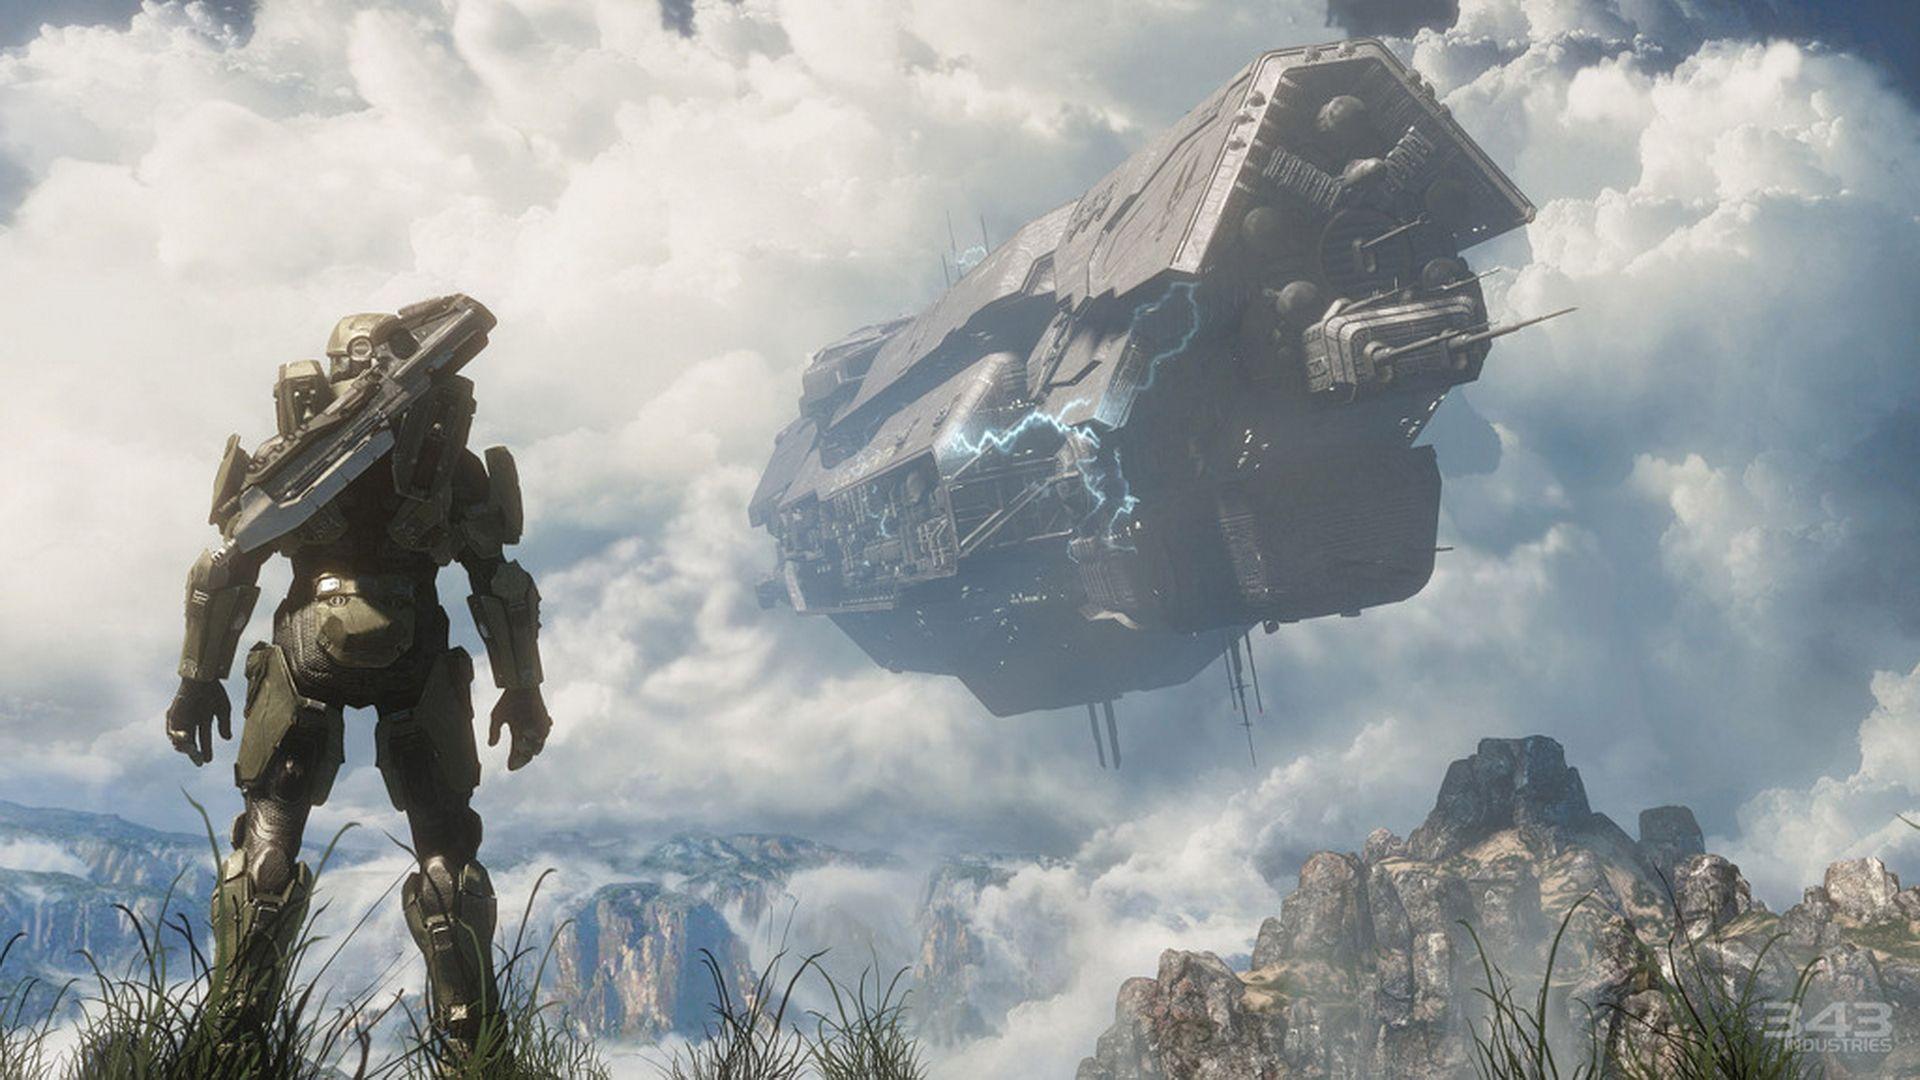 Halo 4 HD Wallpaper and Background